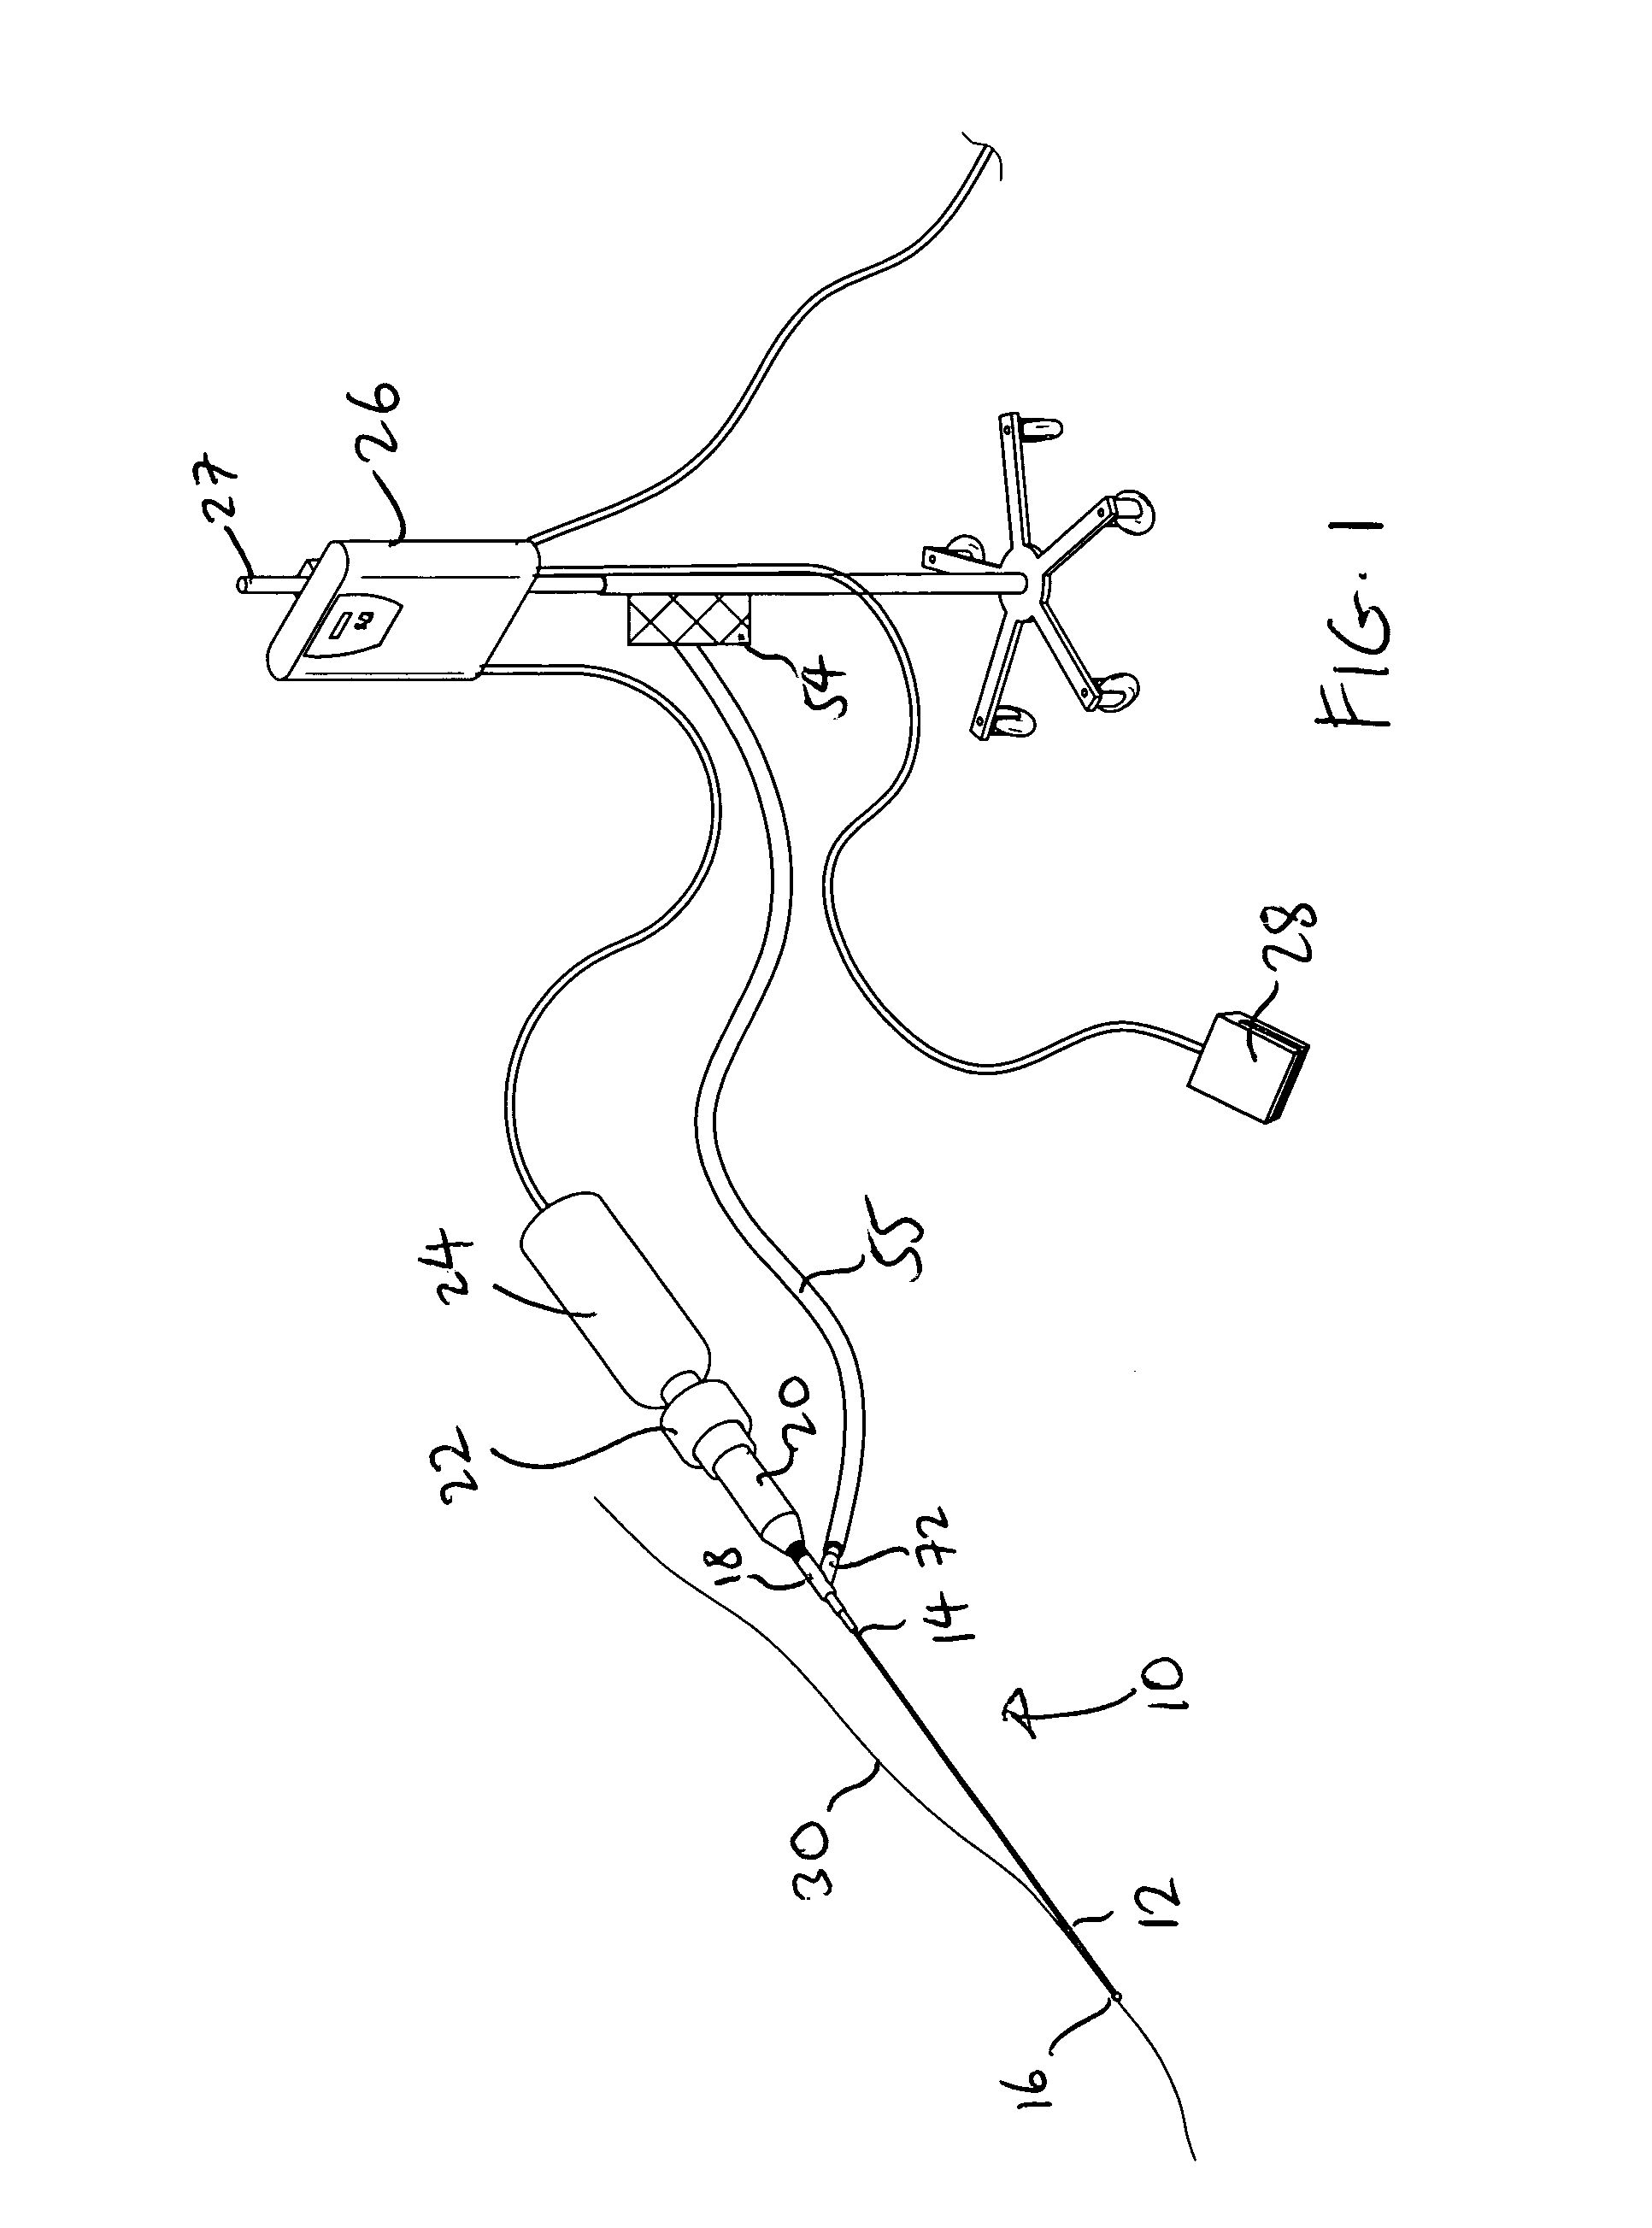 Therapeutic ultrasound system